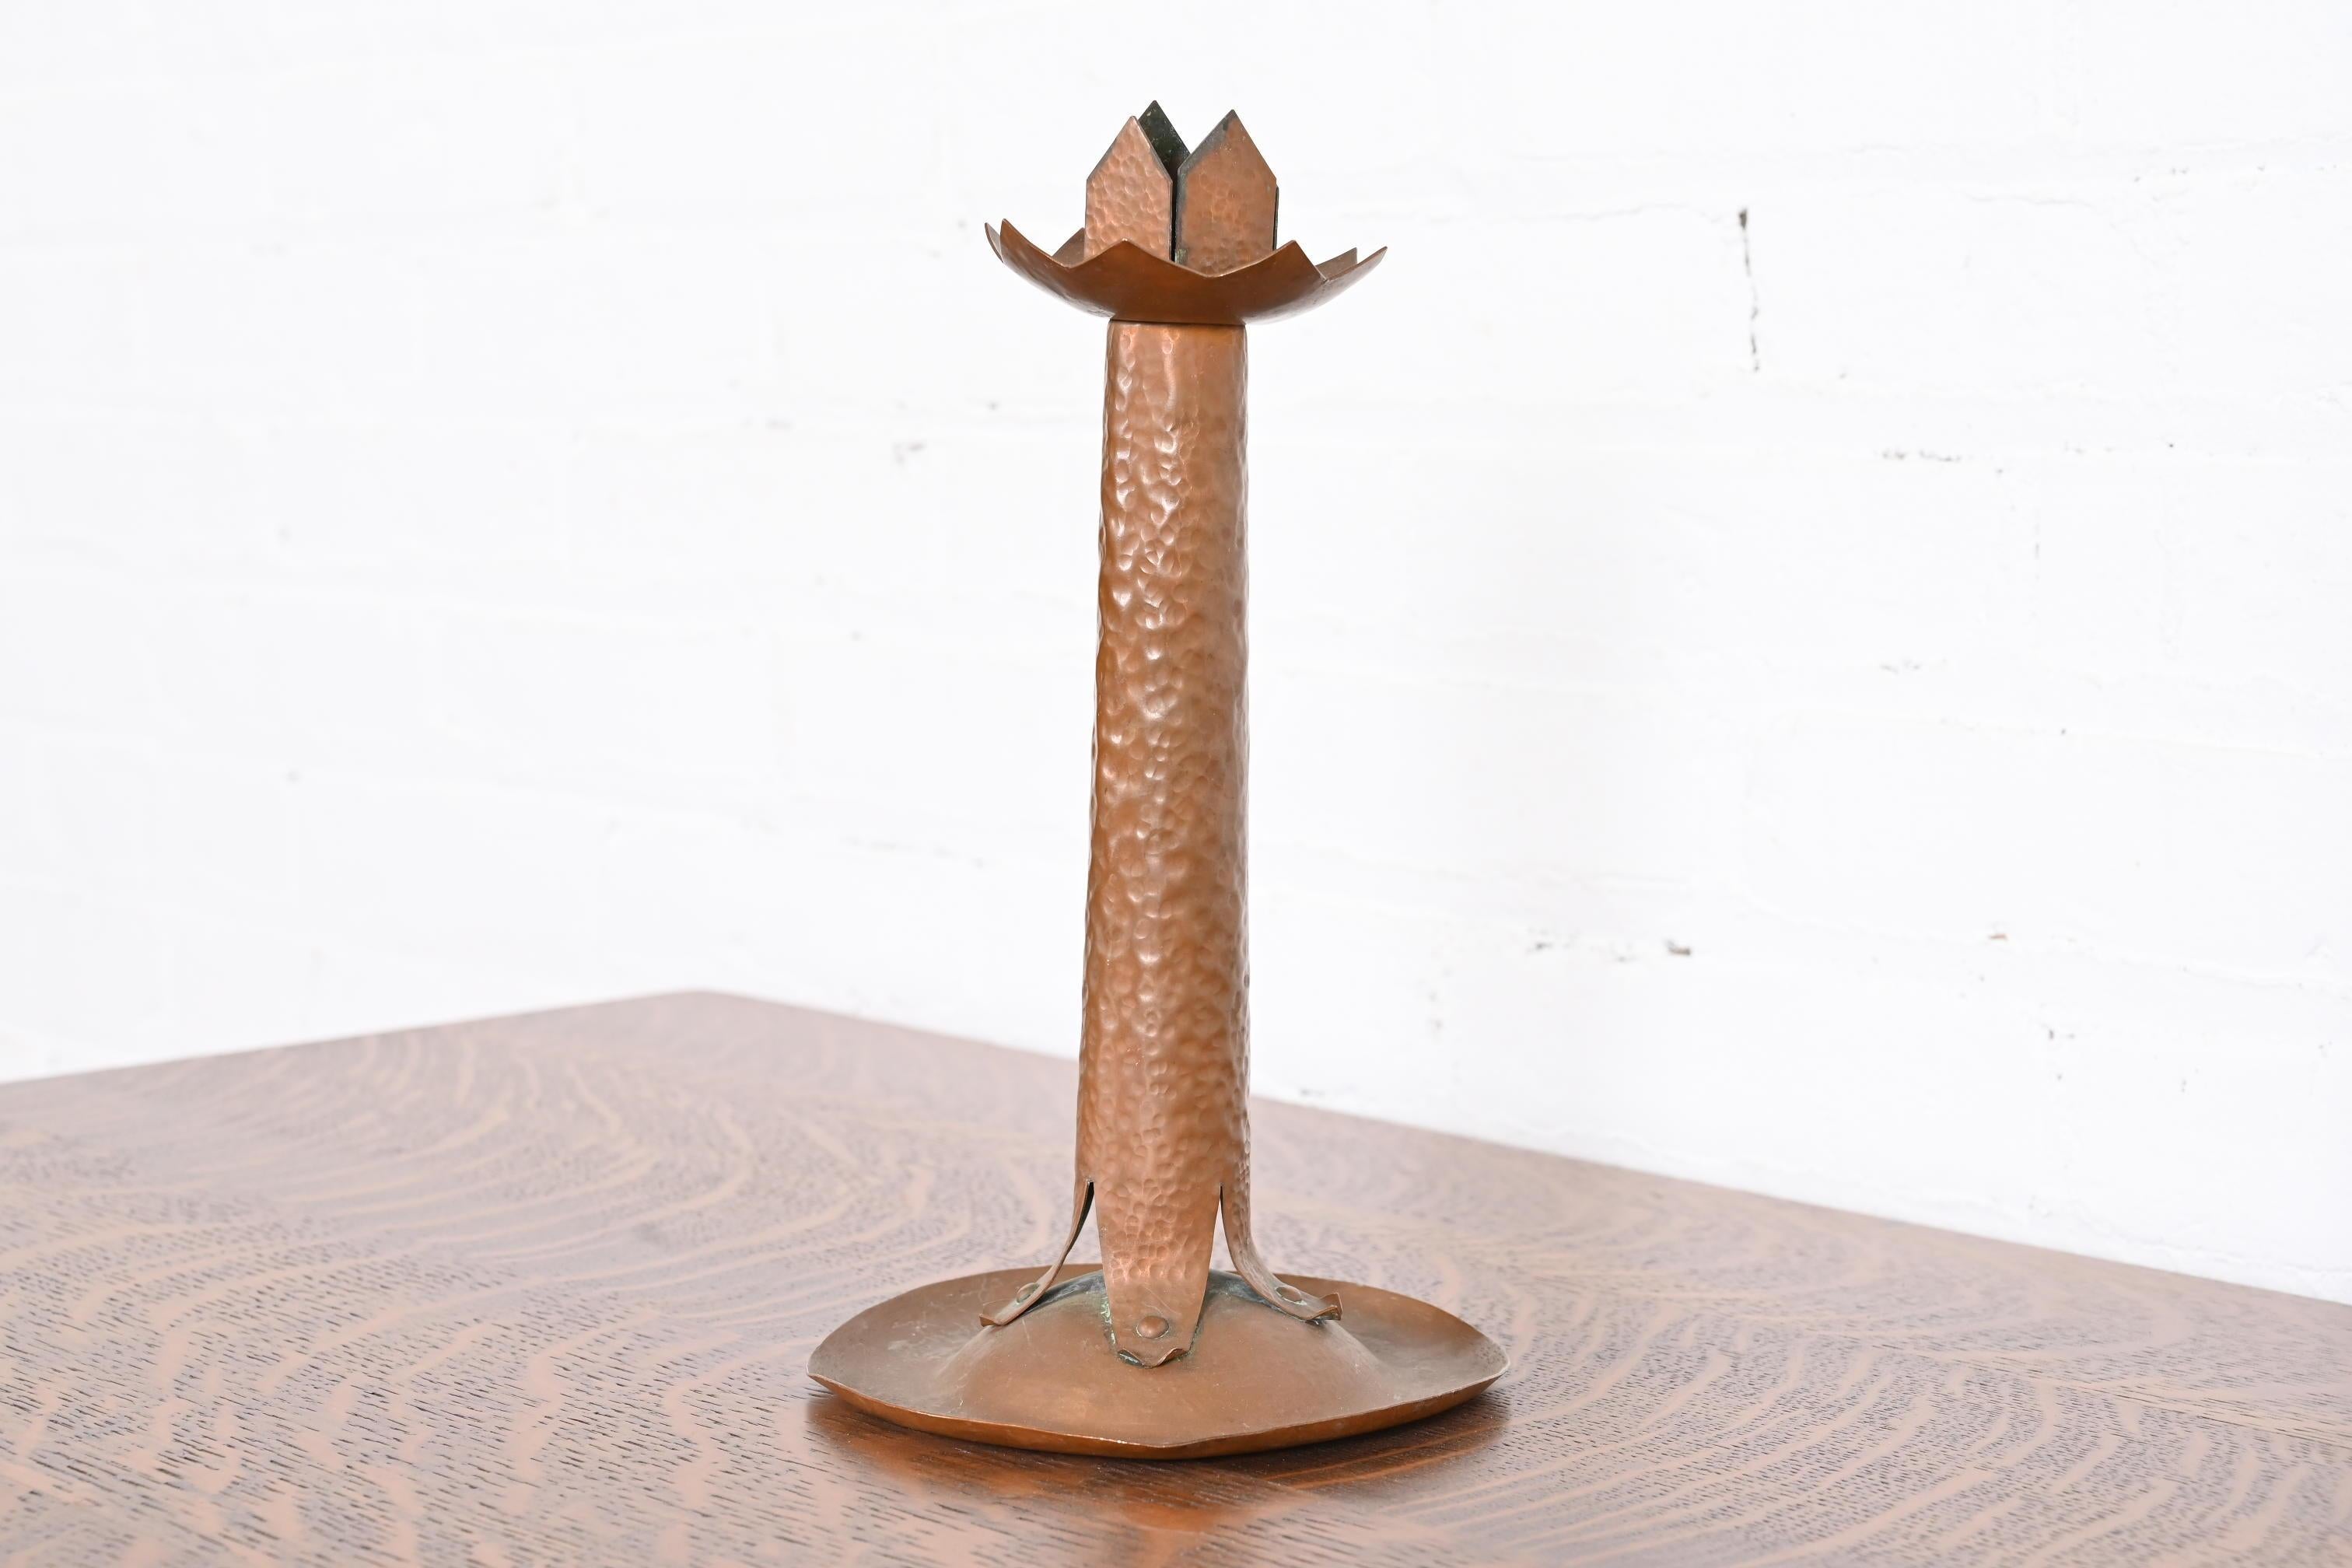 A gorgeous Arts & Crafts period hand-hammered copper candlestick

In the manner of Stickley Brothers

USA, Early 20th century

Measures: 5.75